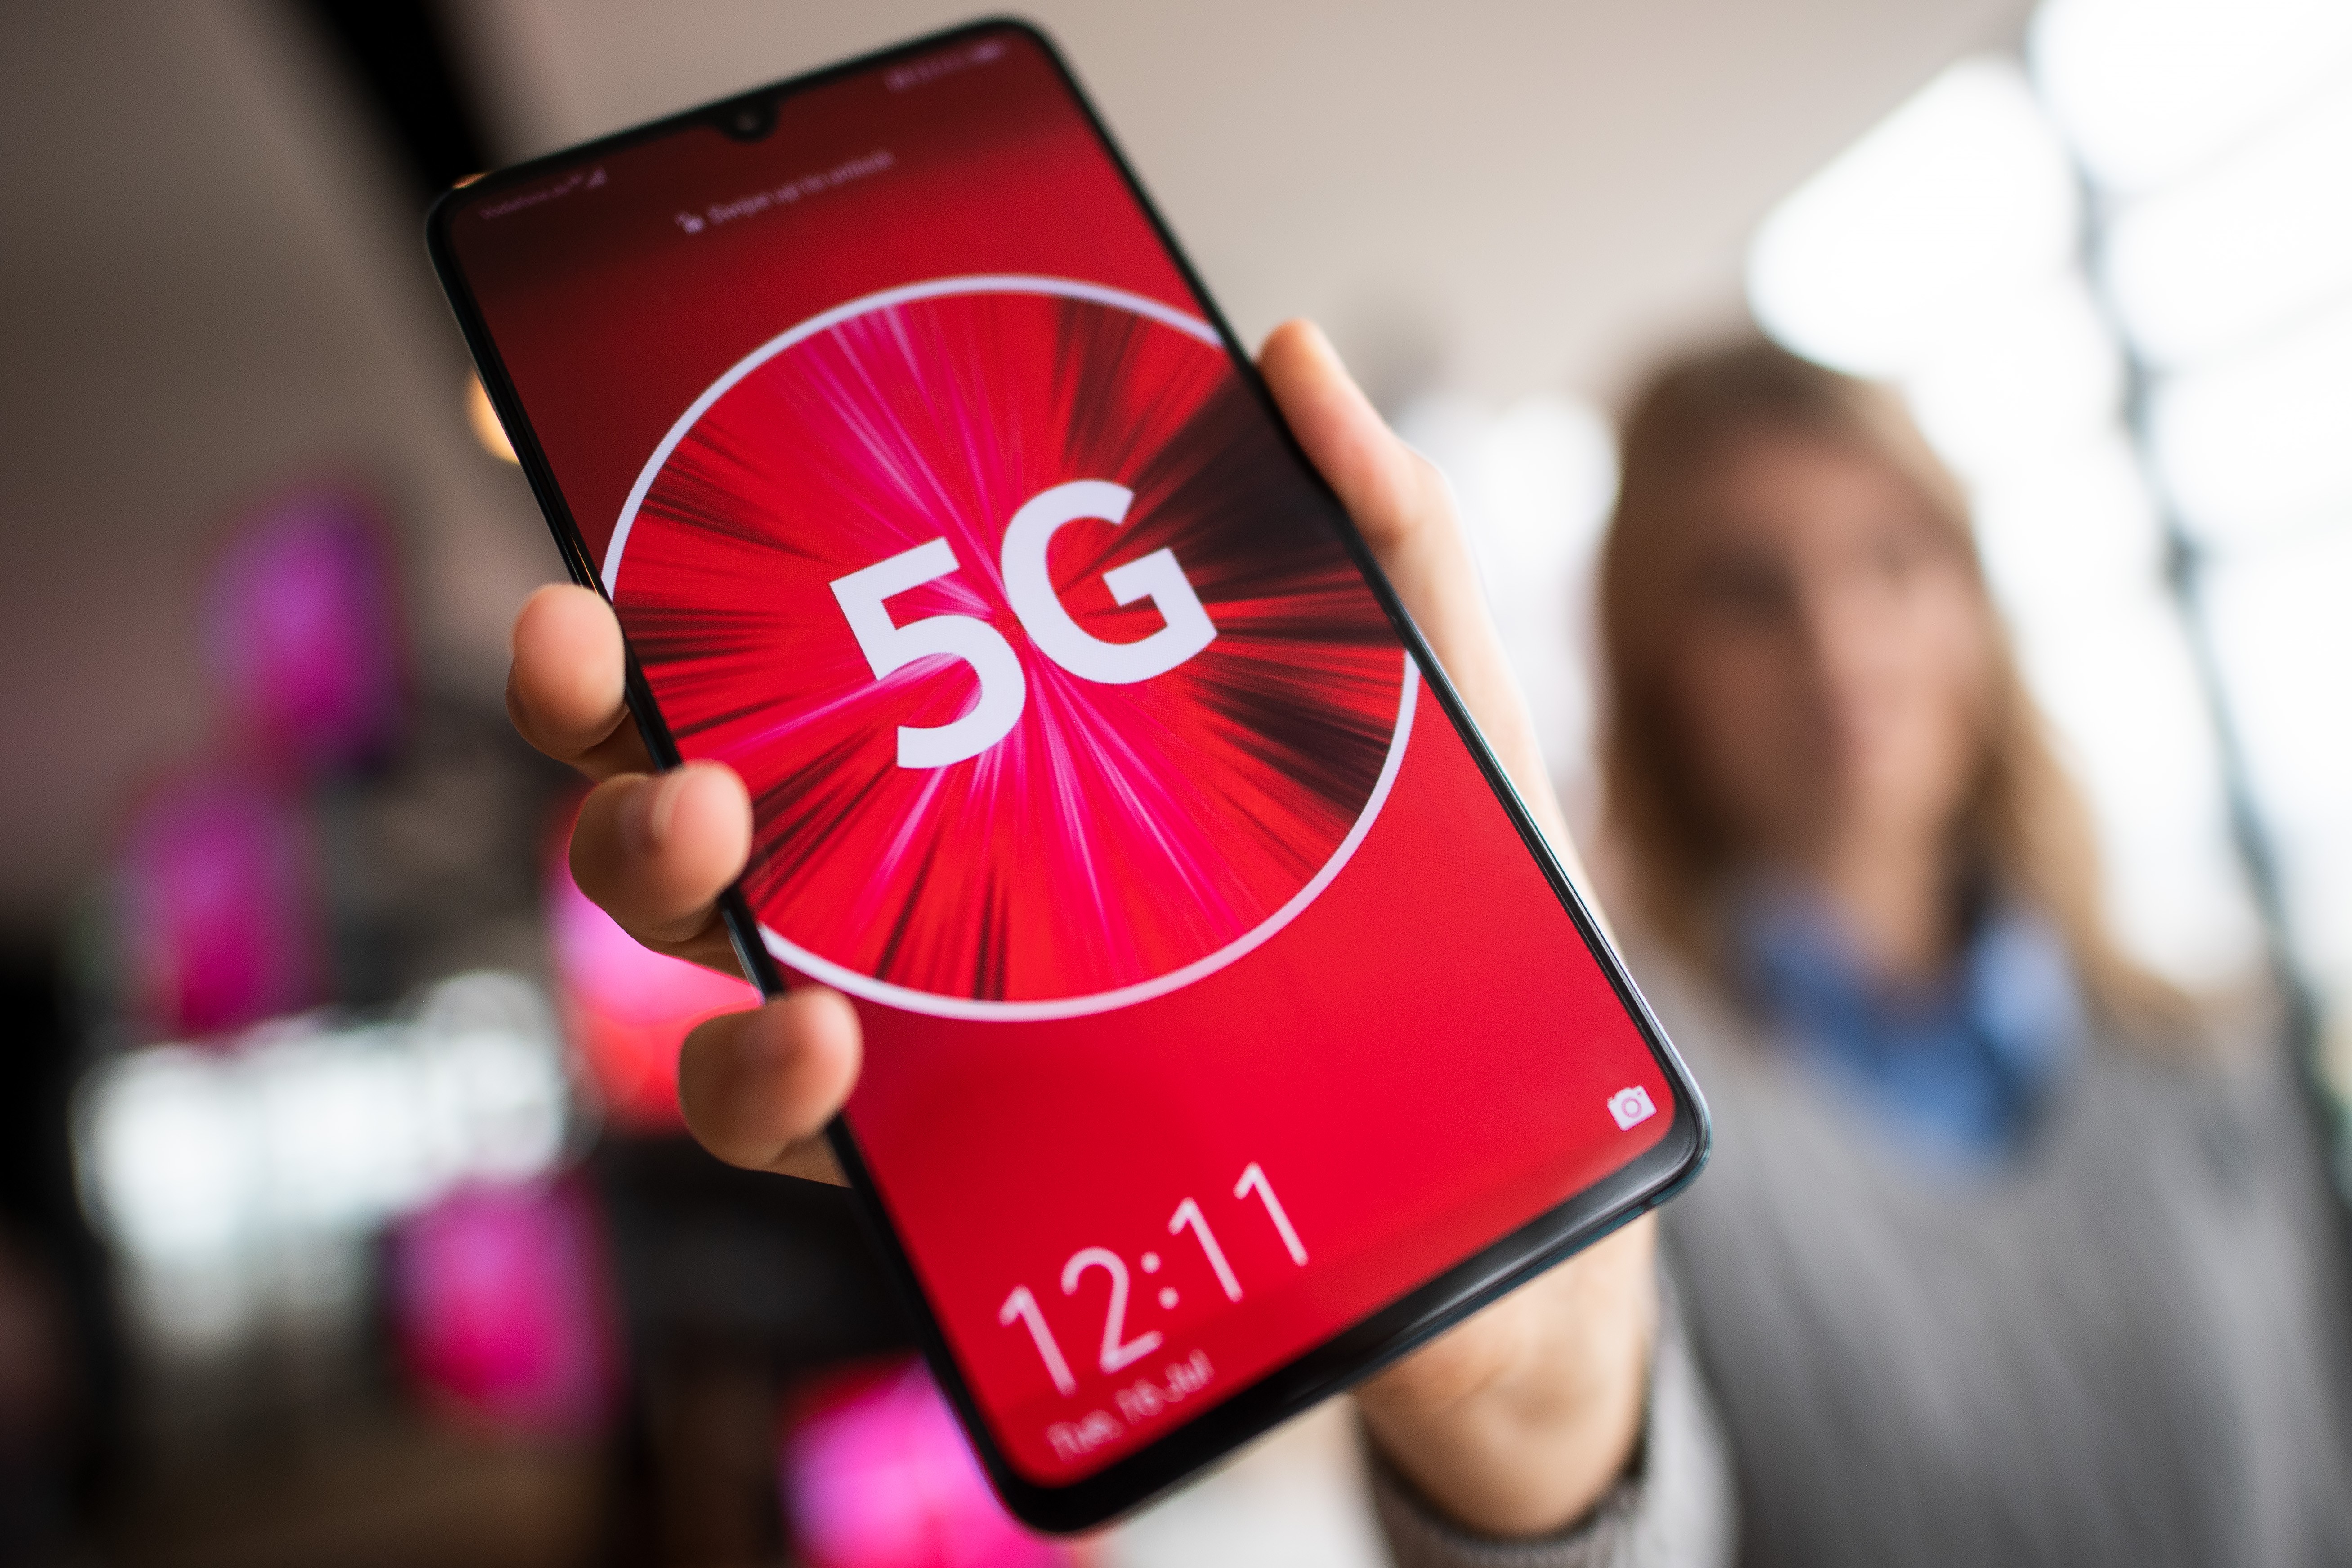 The tech race between the US and China begins with competing 5G telecommunications networks. Photo: dpa